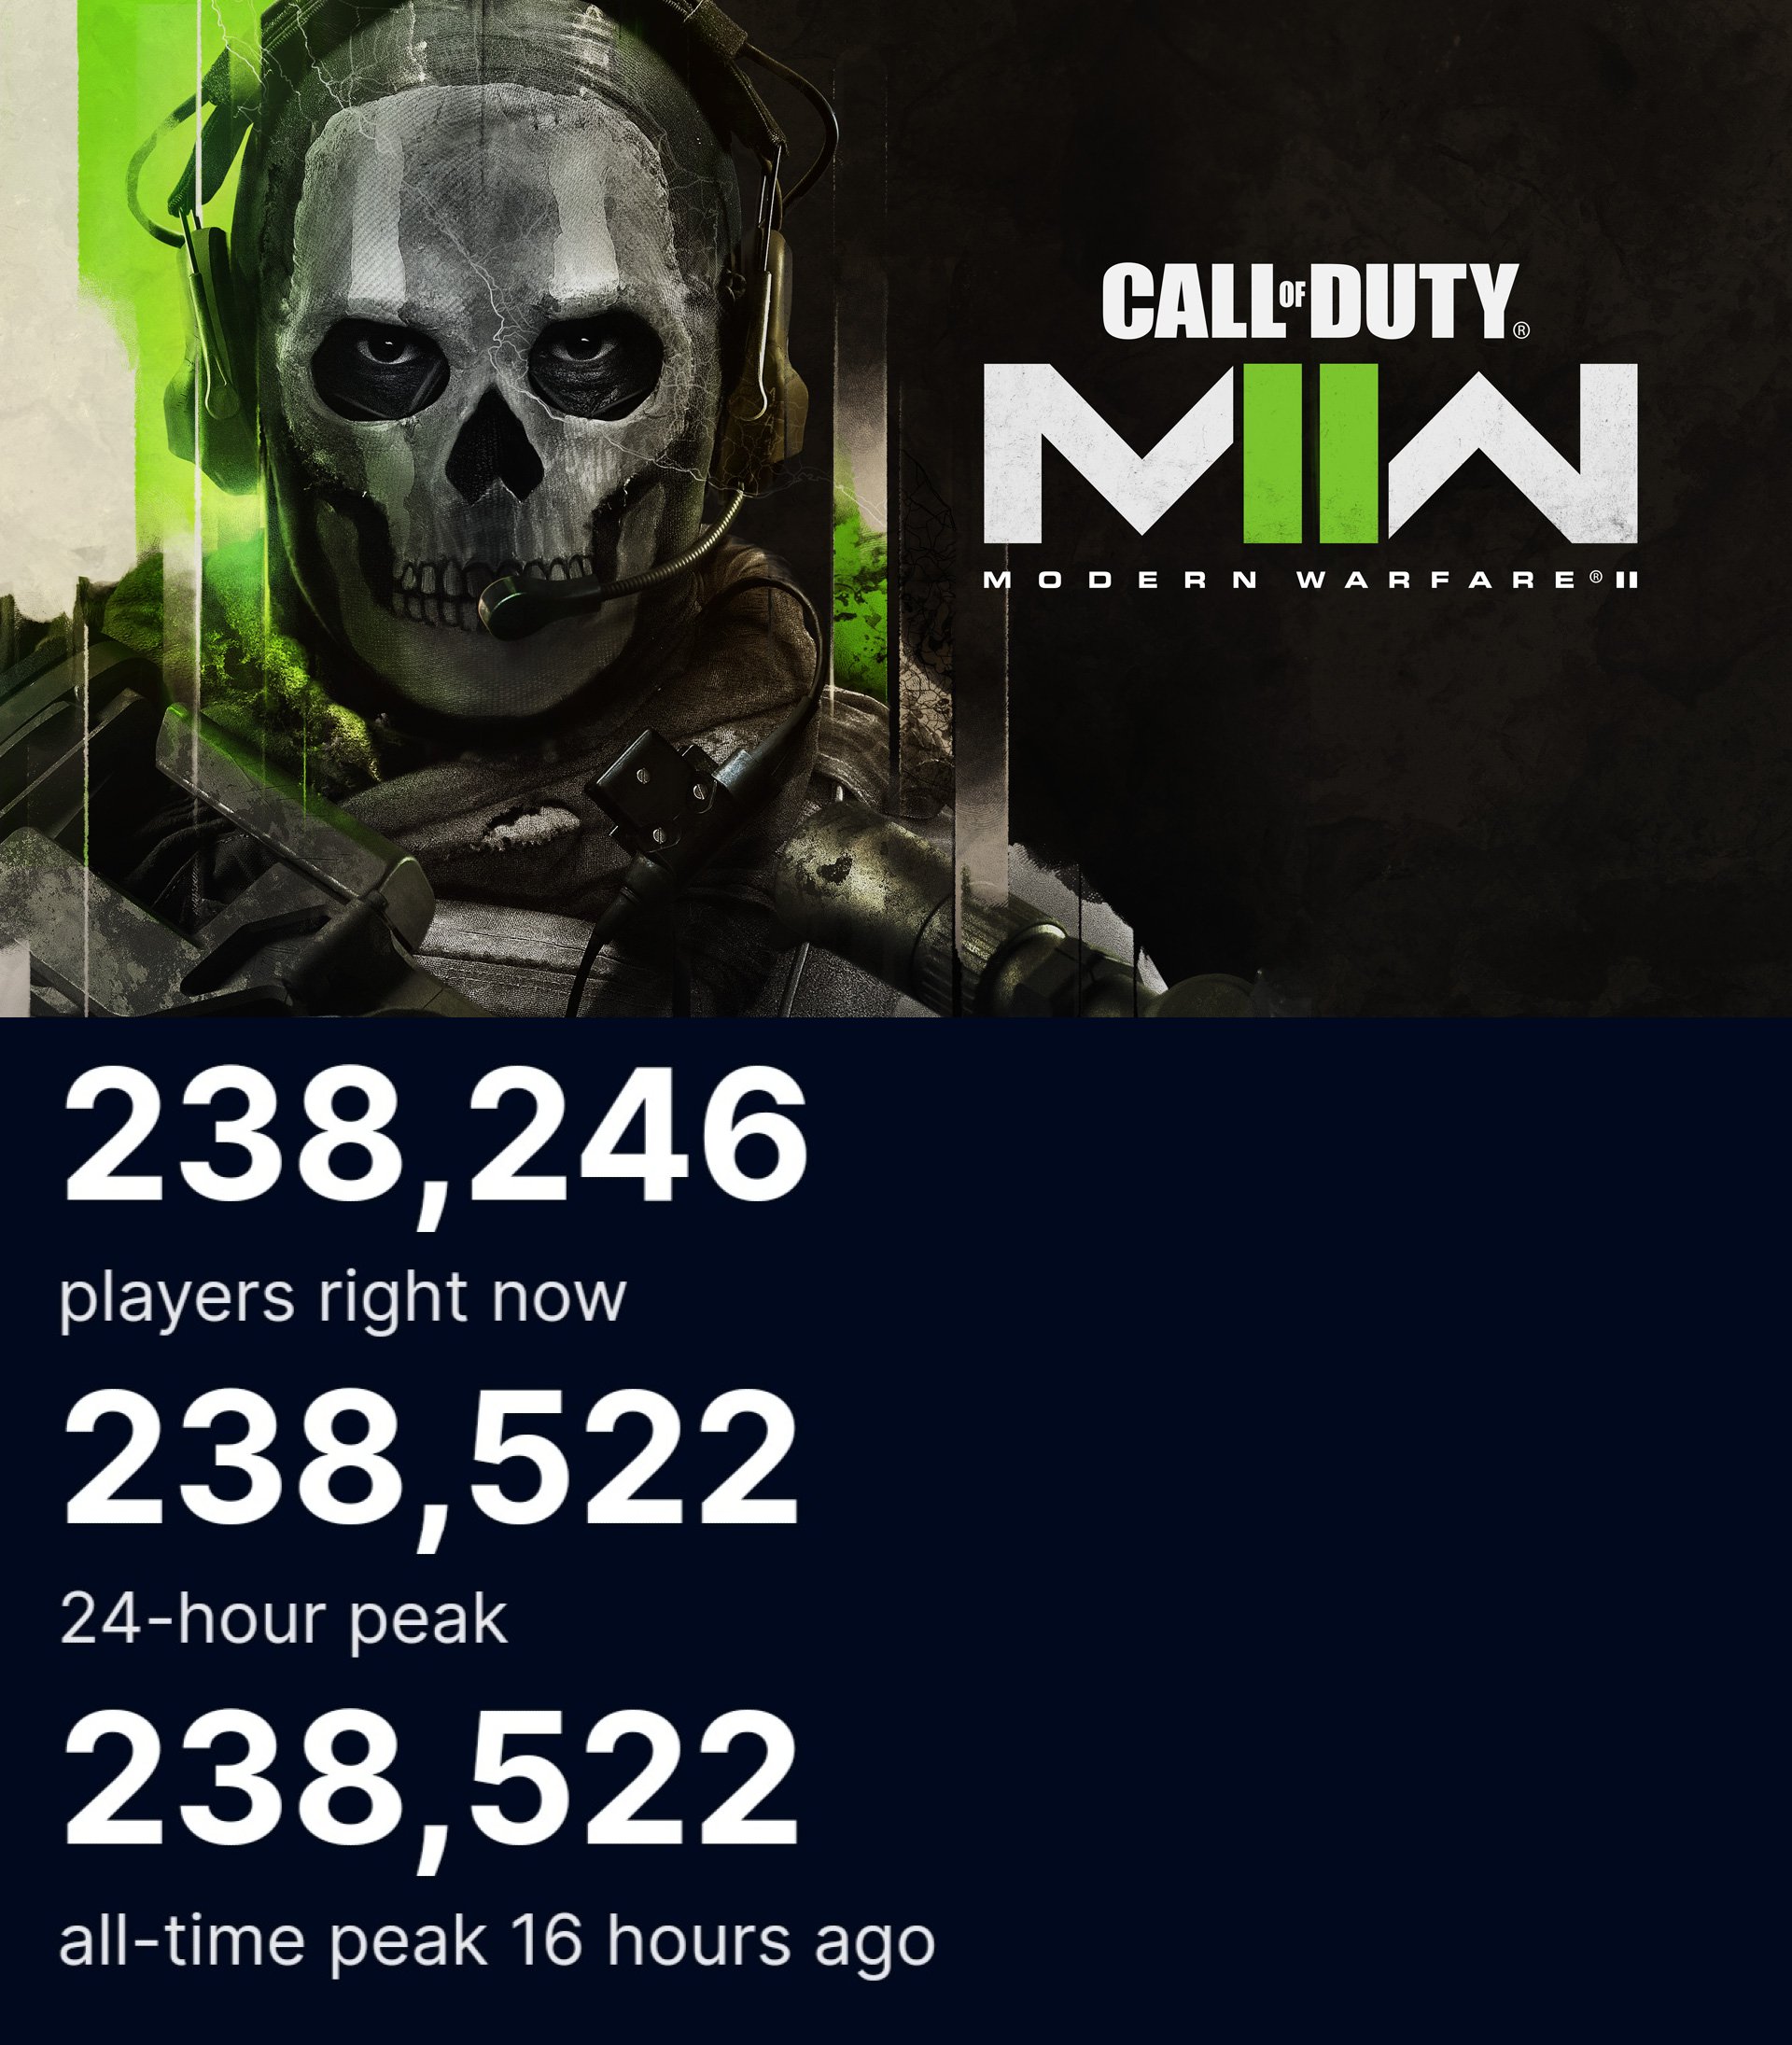 Slow Sales = No Respect for Modern Warfare PC Players